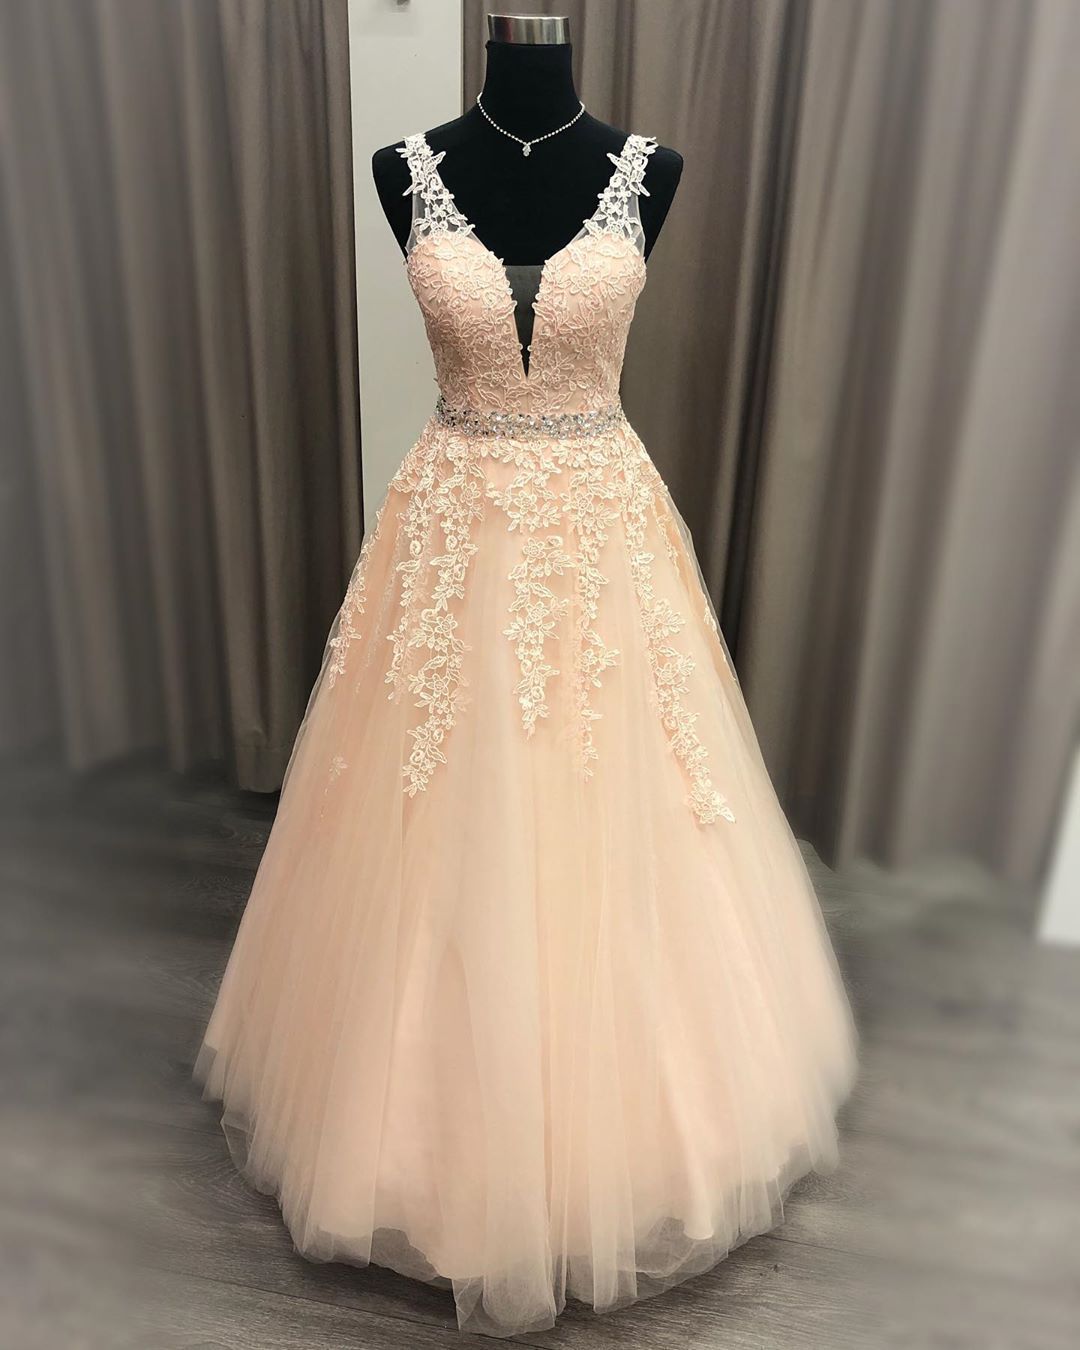 Lace Applique Pink Tulle V-neck Prom Dress With Beading Belt